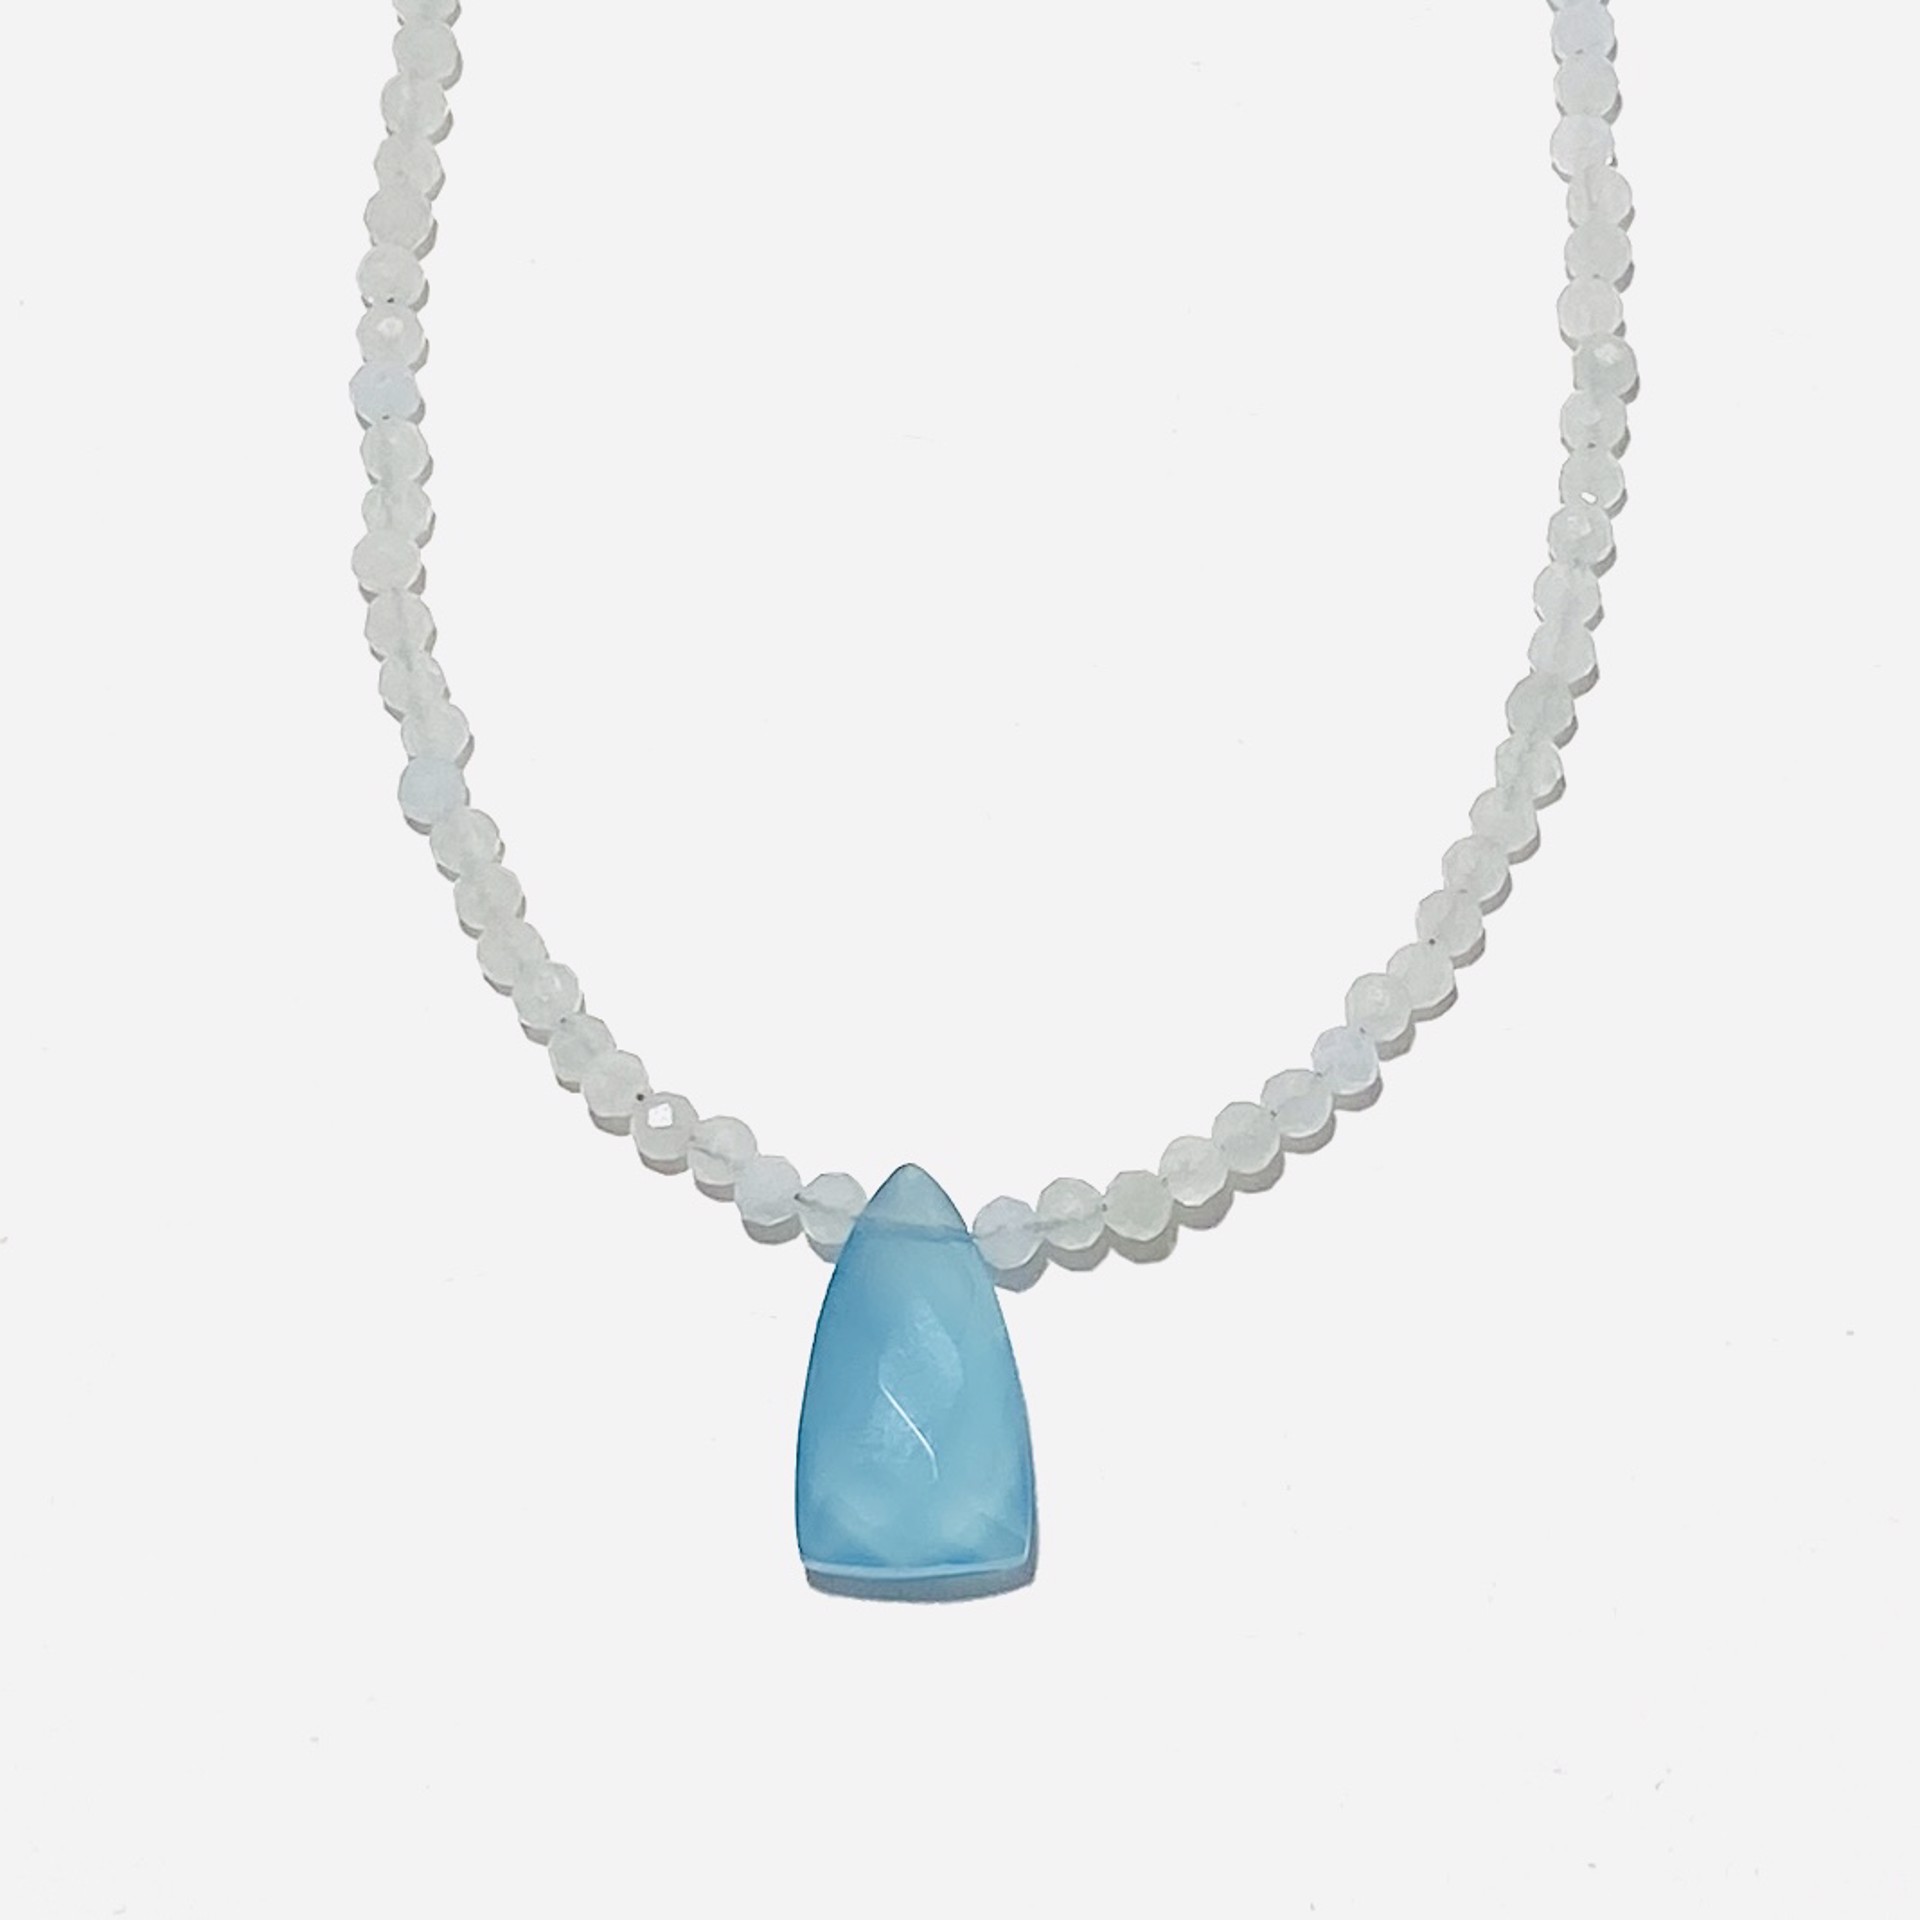 Tiny Faceted Aquamarine Blue Chalcedony Drop Necklace NT22-182 by Nance Trueworthy